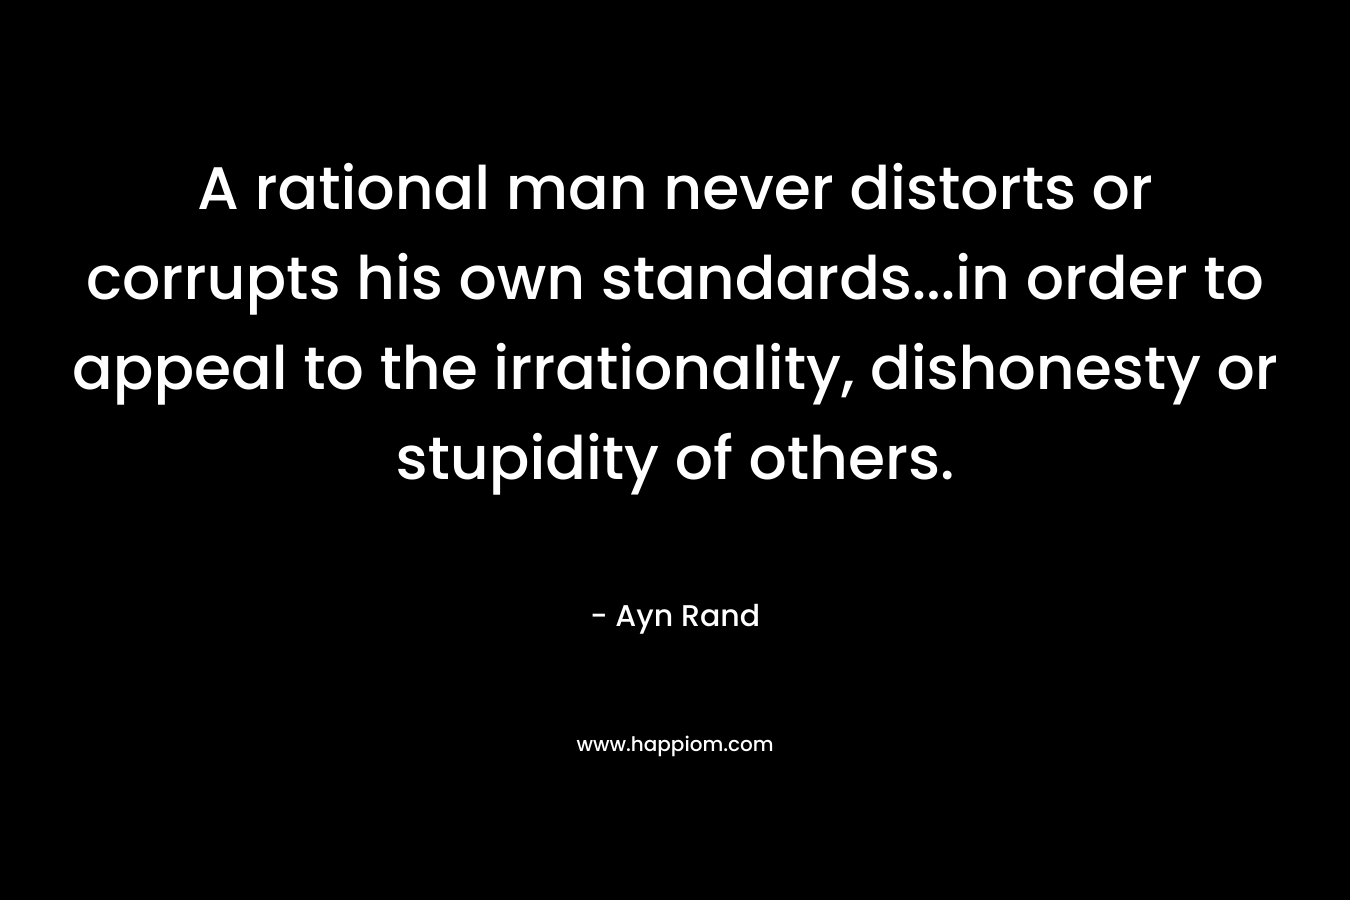 A rational man never distorts or corrupts his own standards…in order to appeal to the irrationality, dishonesty or stupidity of others. – Ayn Rand